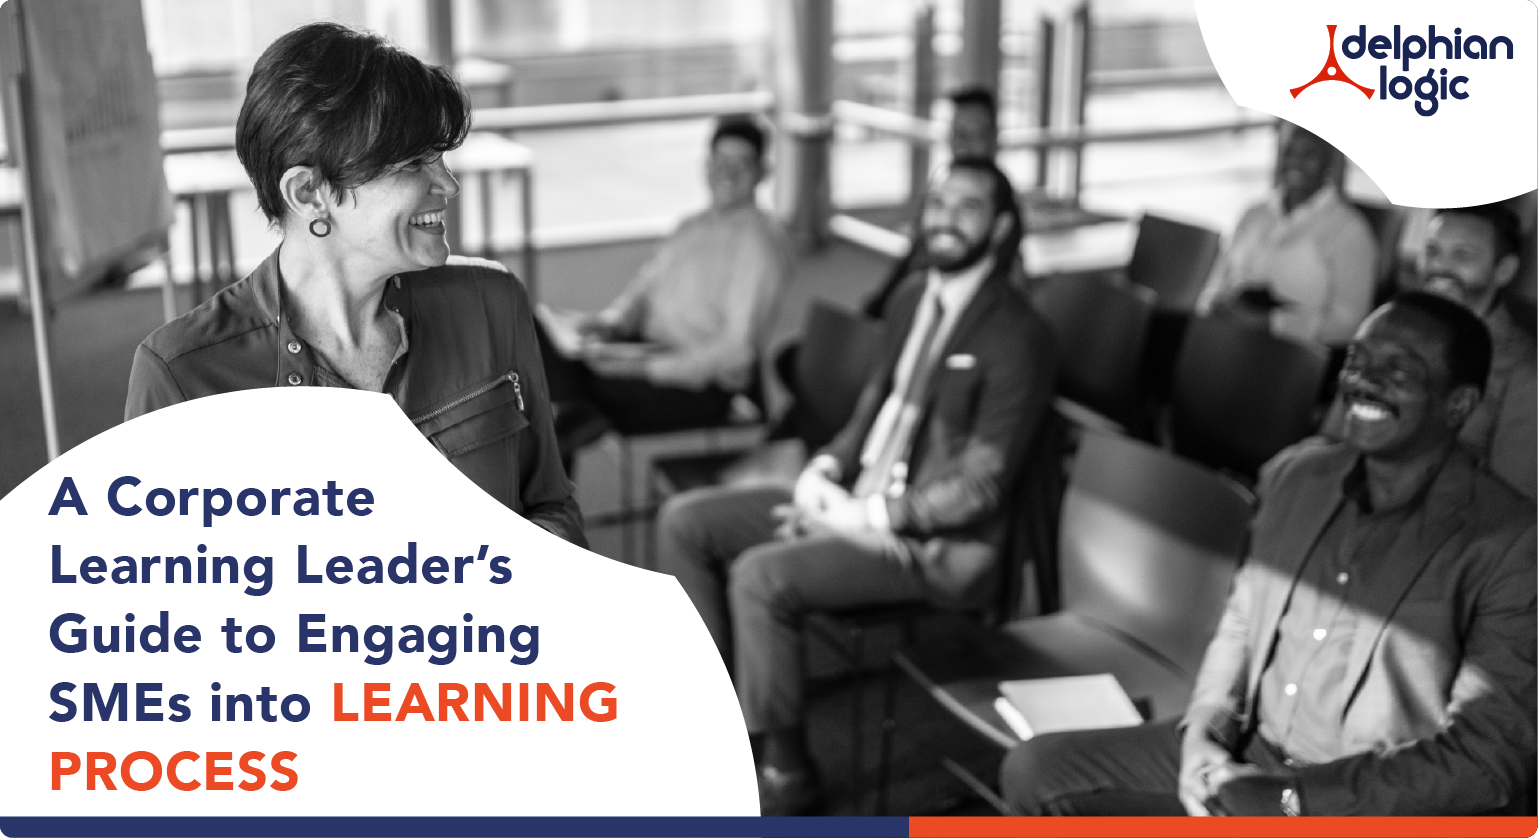 A Corporate Learning Leader’s Guide to Engaging SMEs into Learning Process